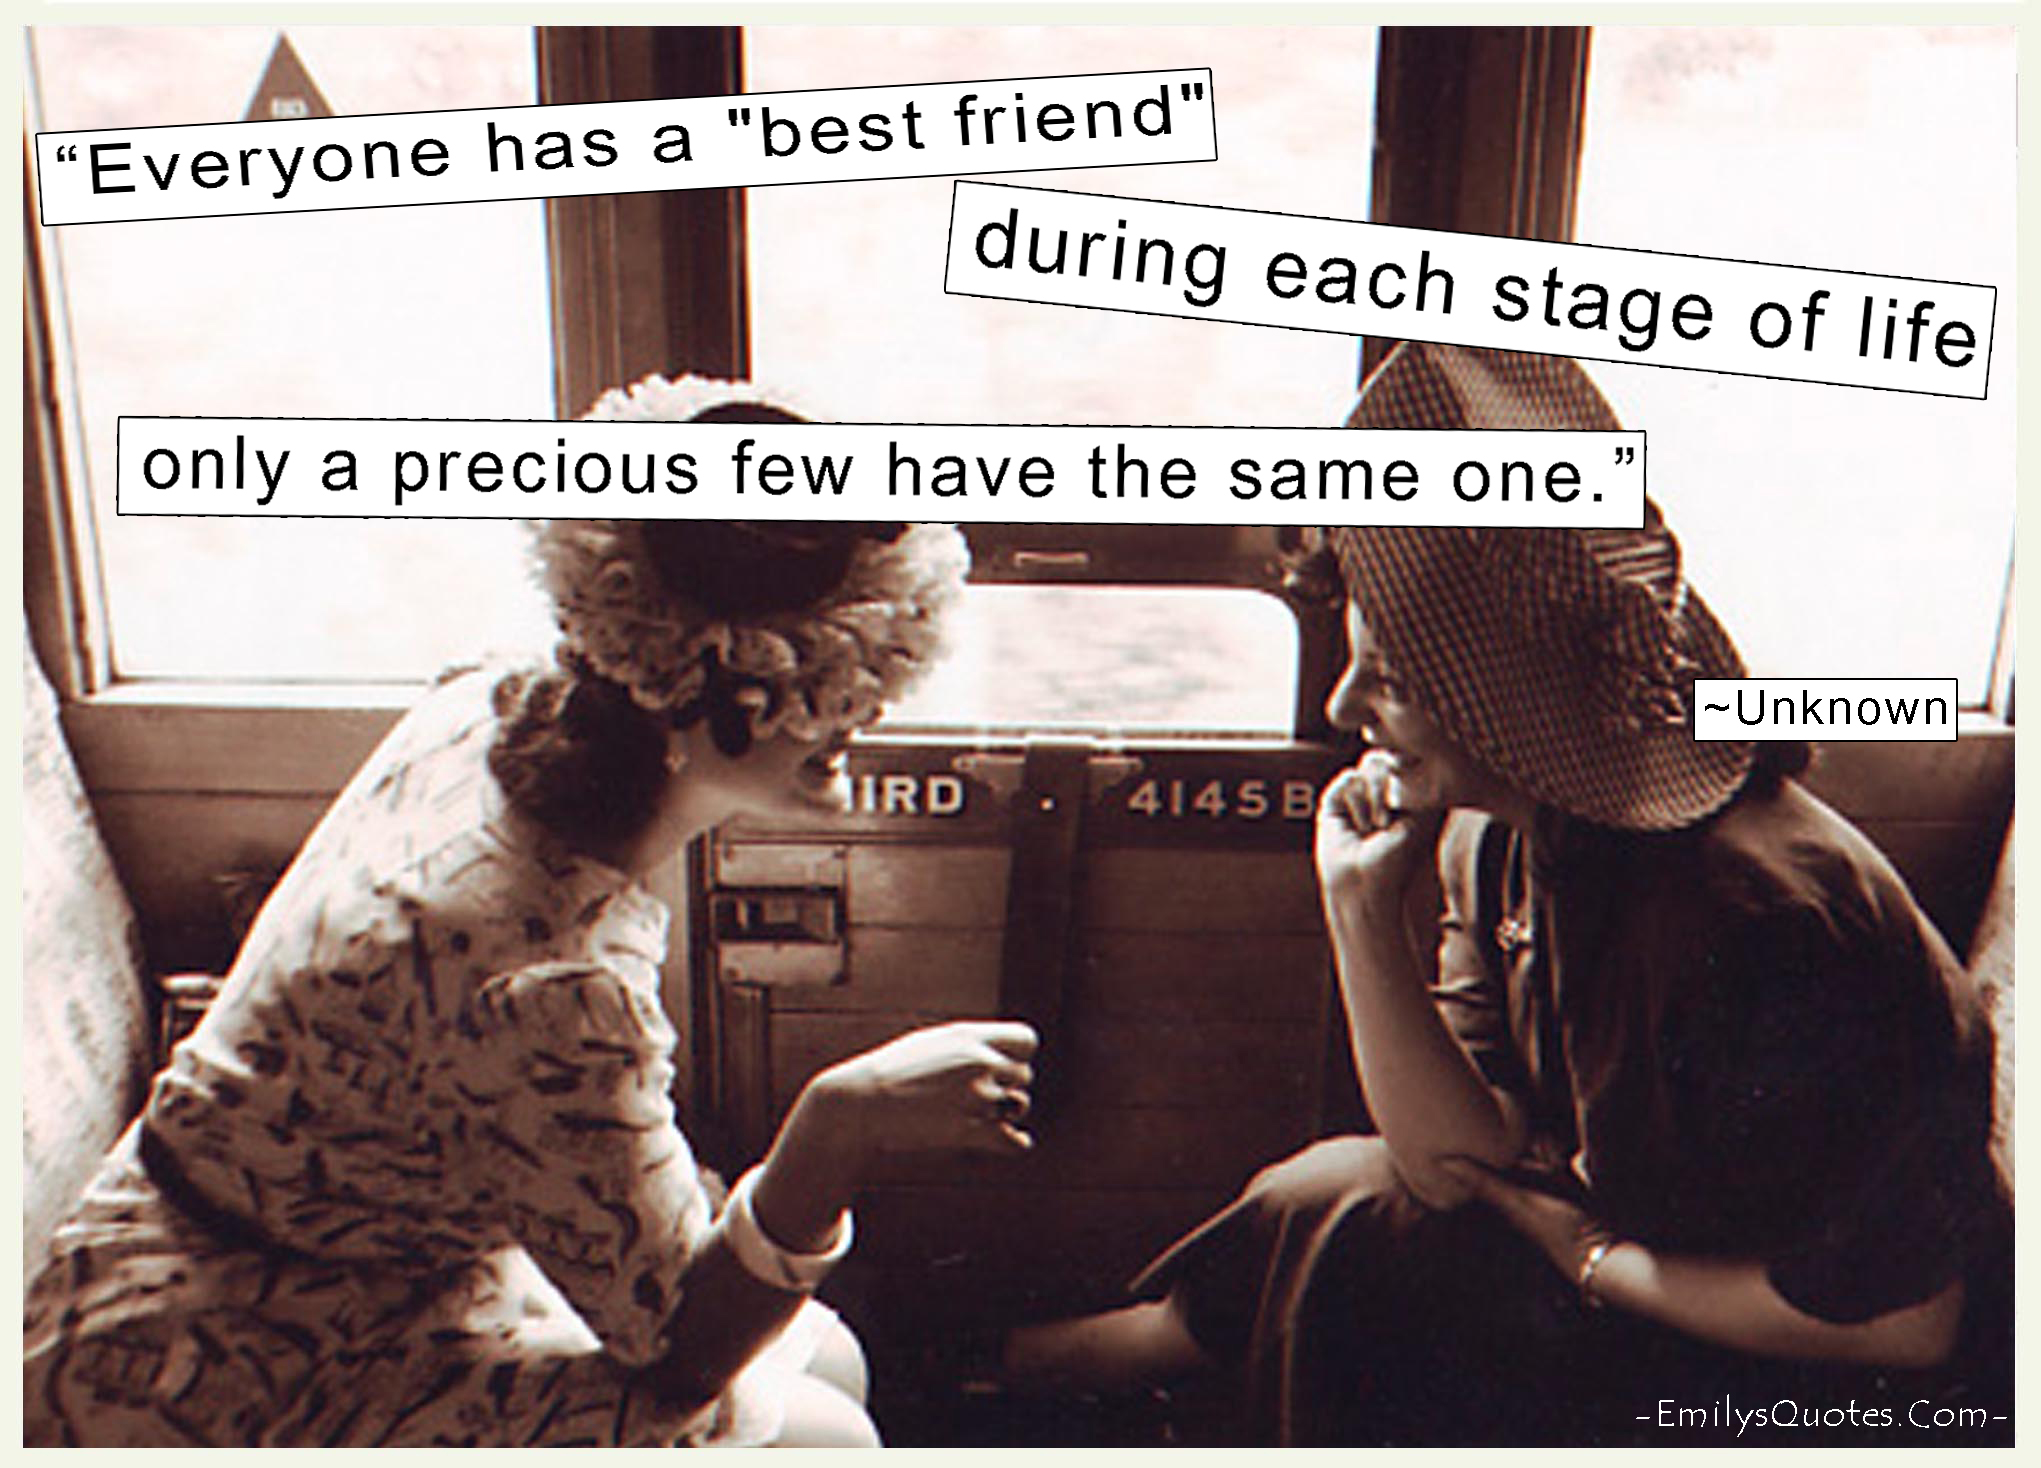 Everyone has a “best friend” during each stage of life-only a precious